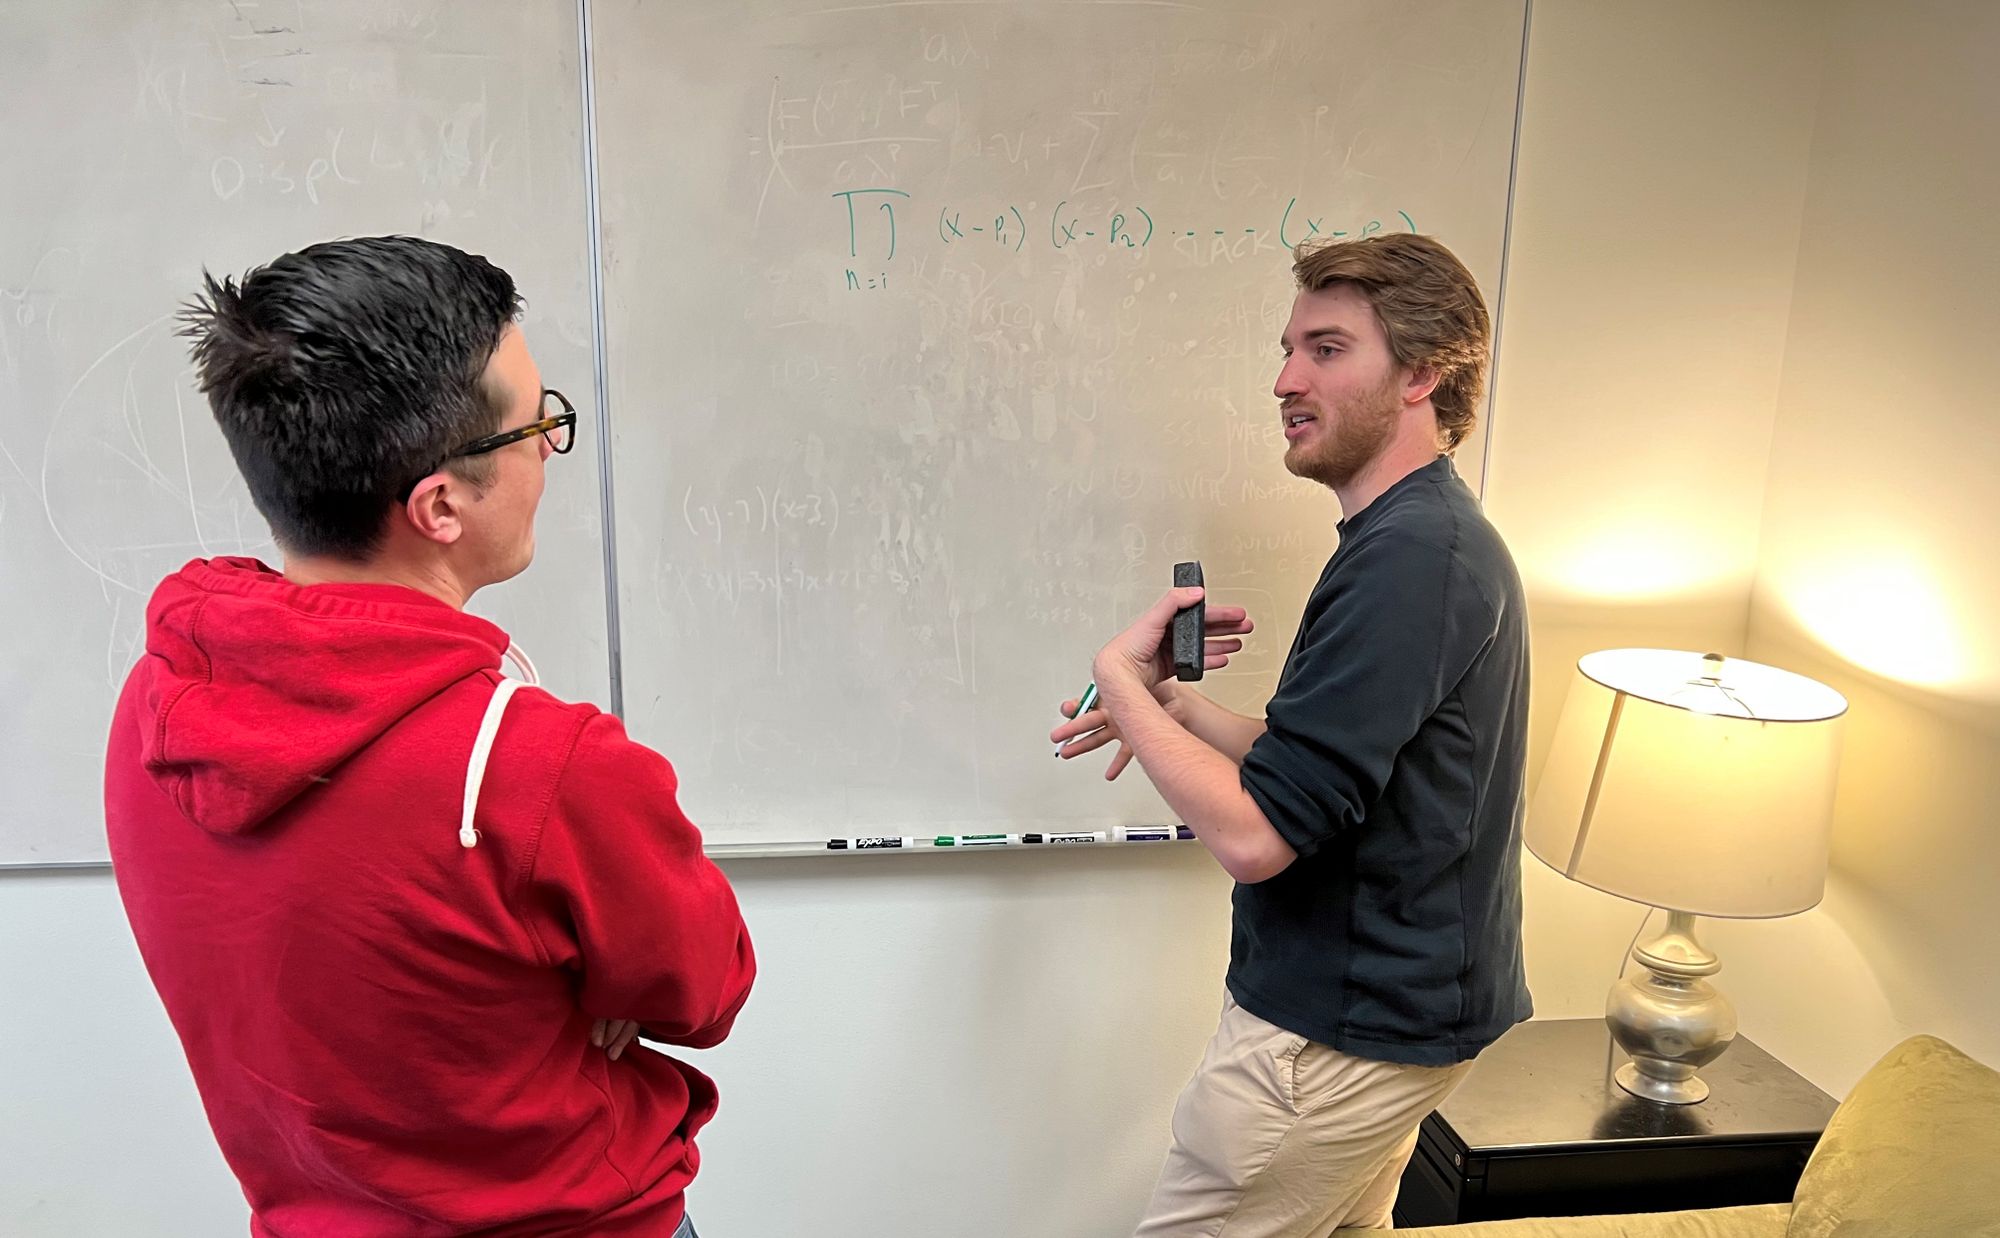 Loyola Computer Science Graduate Student, Jack West, Publishes Master's Thesis Work at Prominent Conference